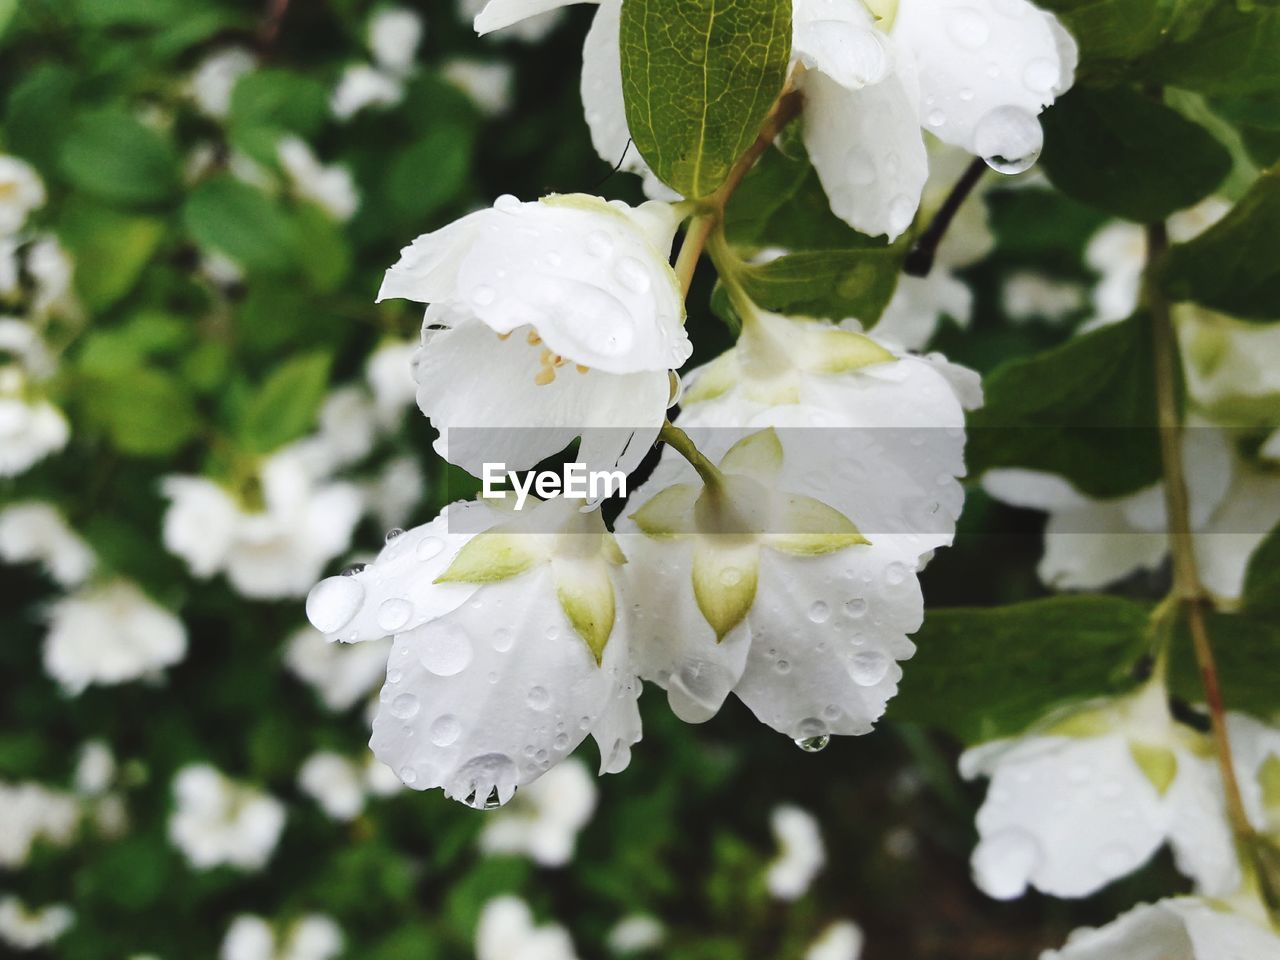 CLOSE-UP OF WHITE ROSE FLOWERS BLOOMING OUTDOORS